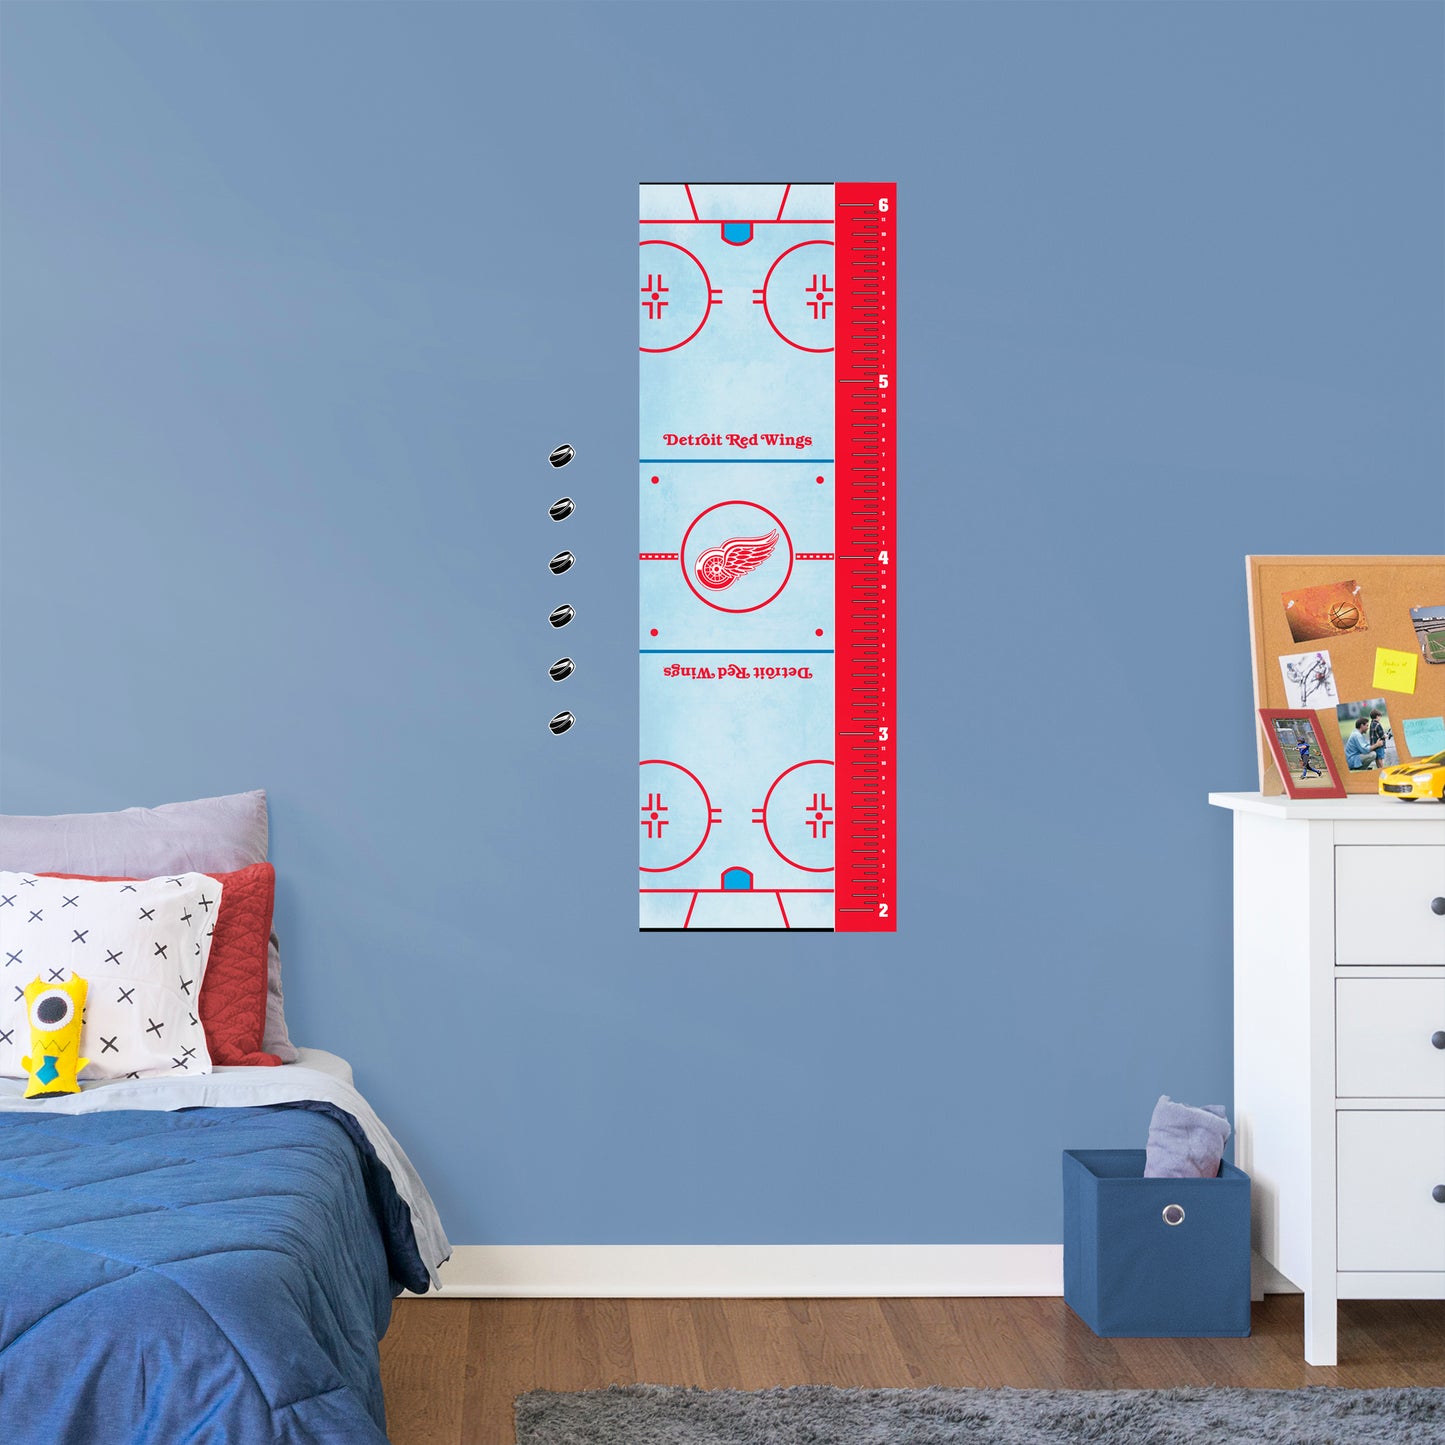 Detroit Red Wings: Rink Growth Chart - Officially Licensed NHL Removable Wall Graphic